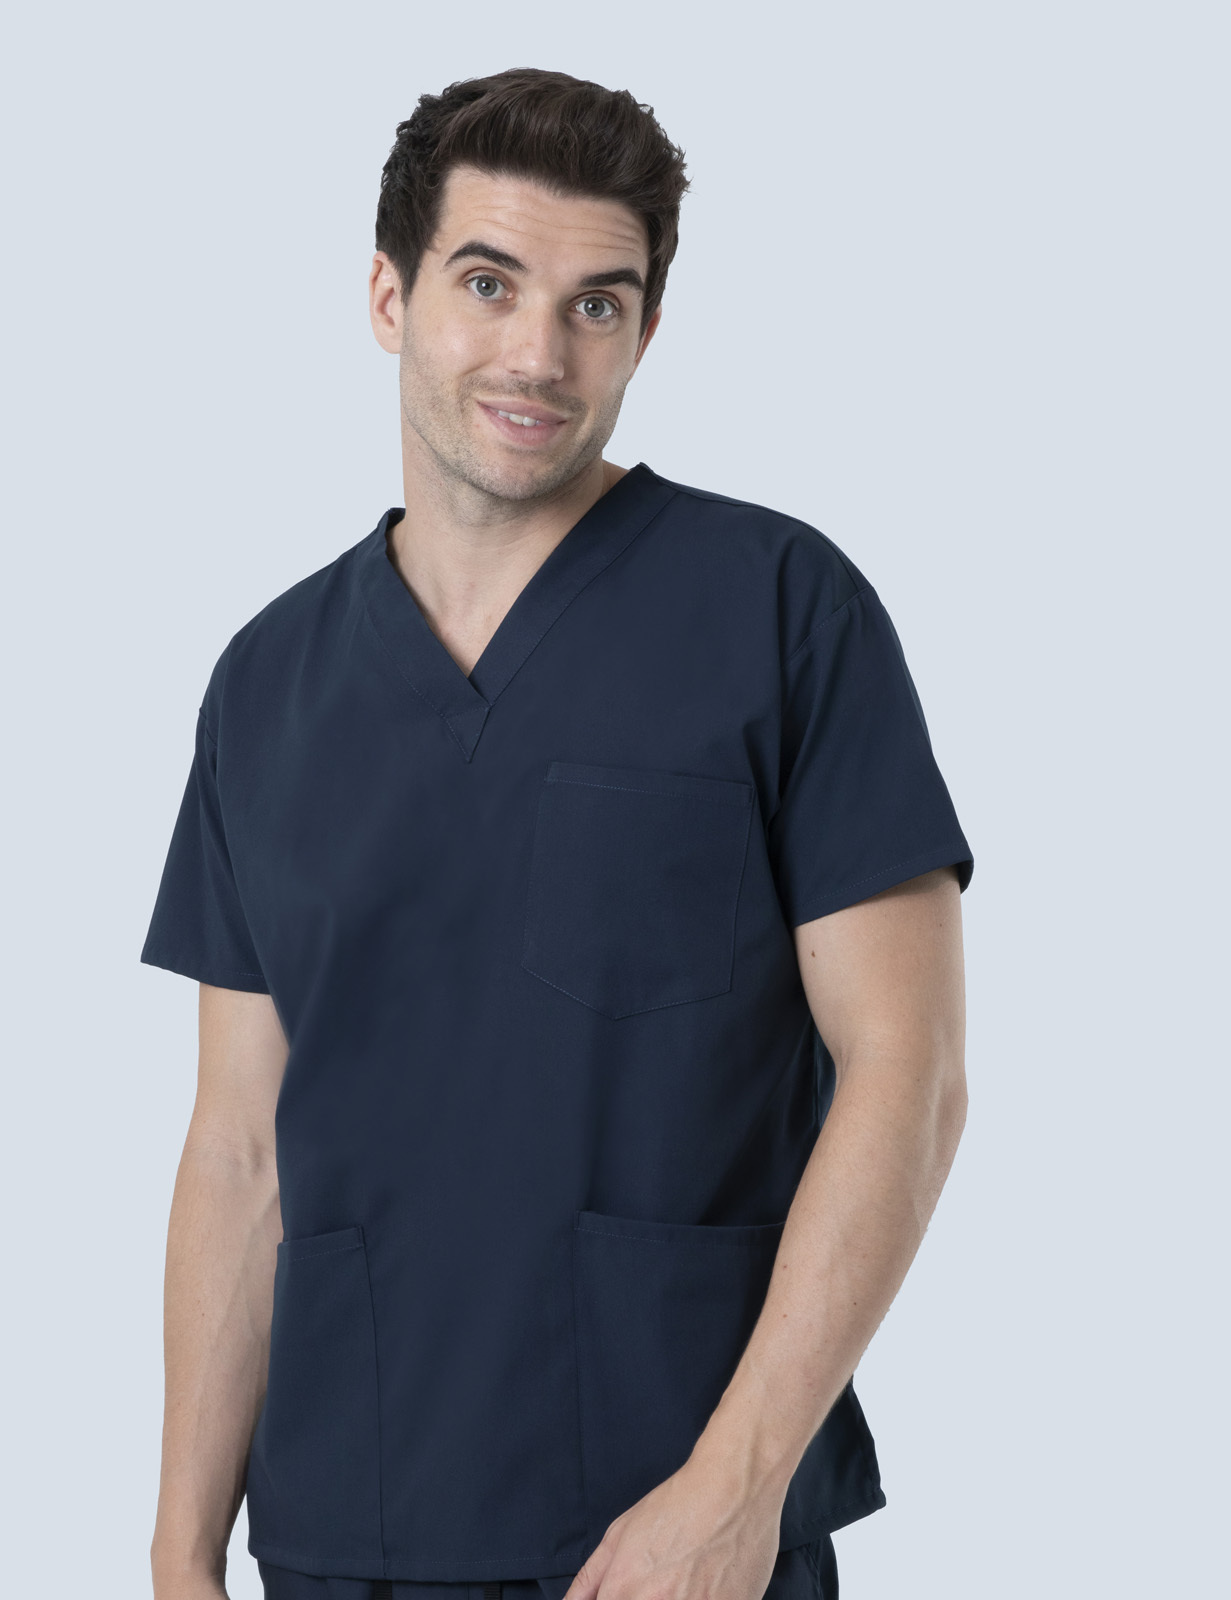 RBWH - 7A South AIN (4 Pocket Scrub Top and Cargo Pants in Navy incl Logos)